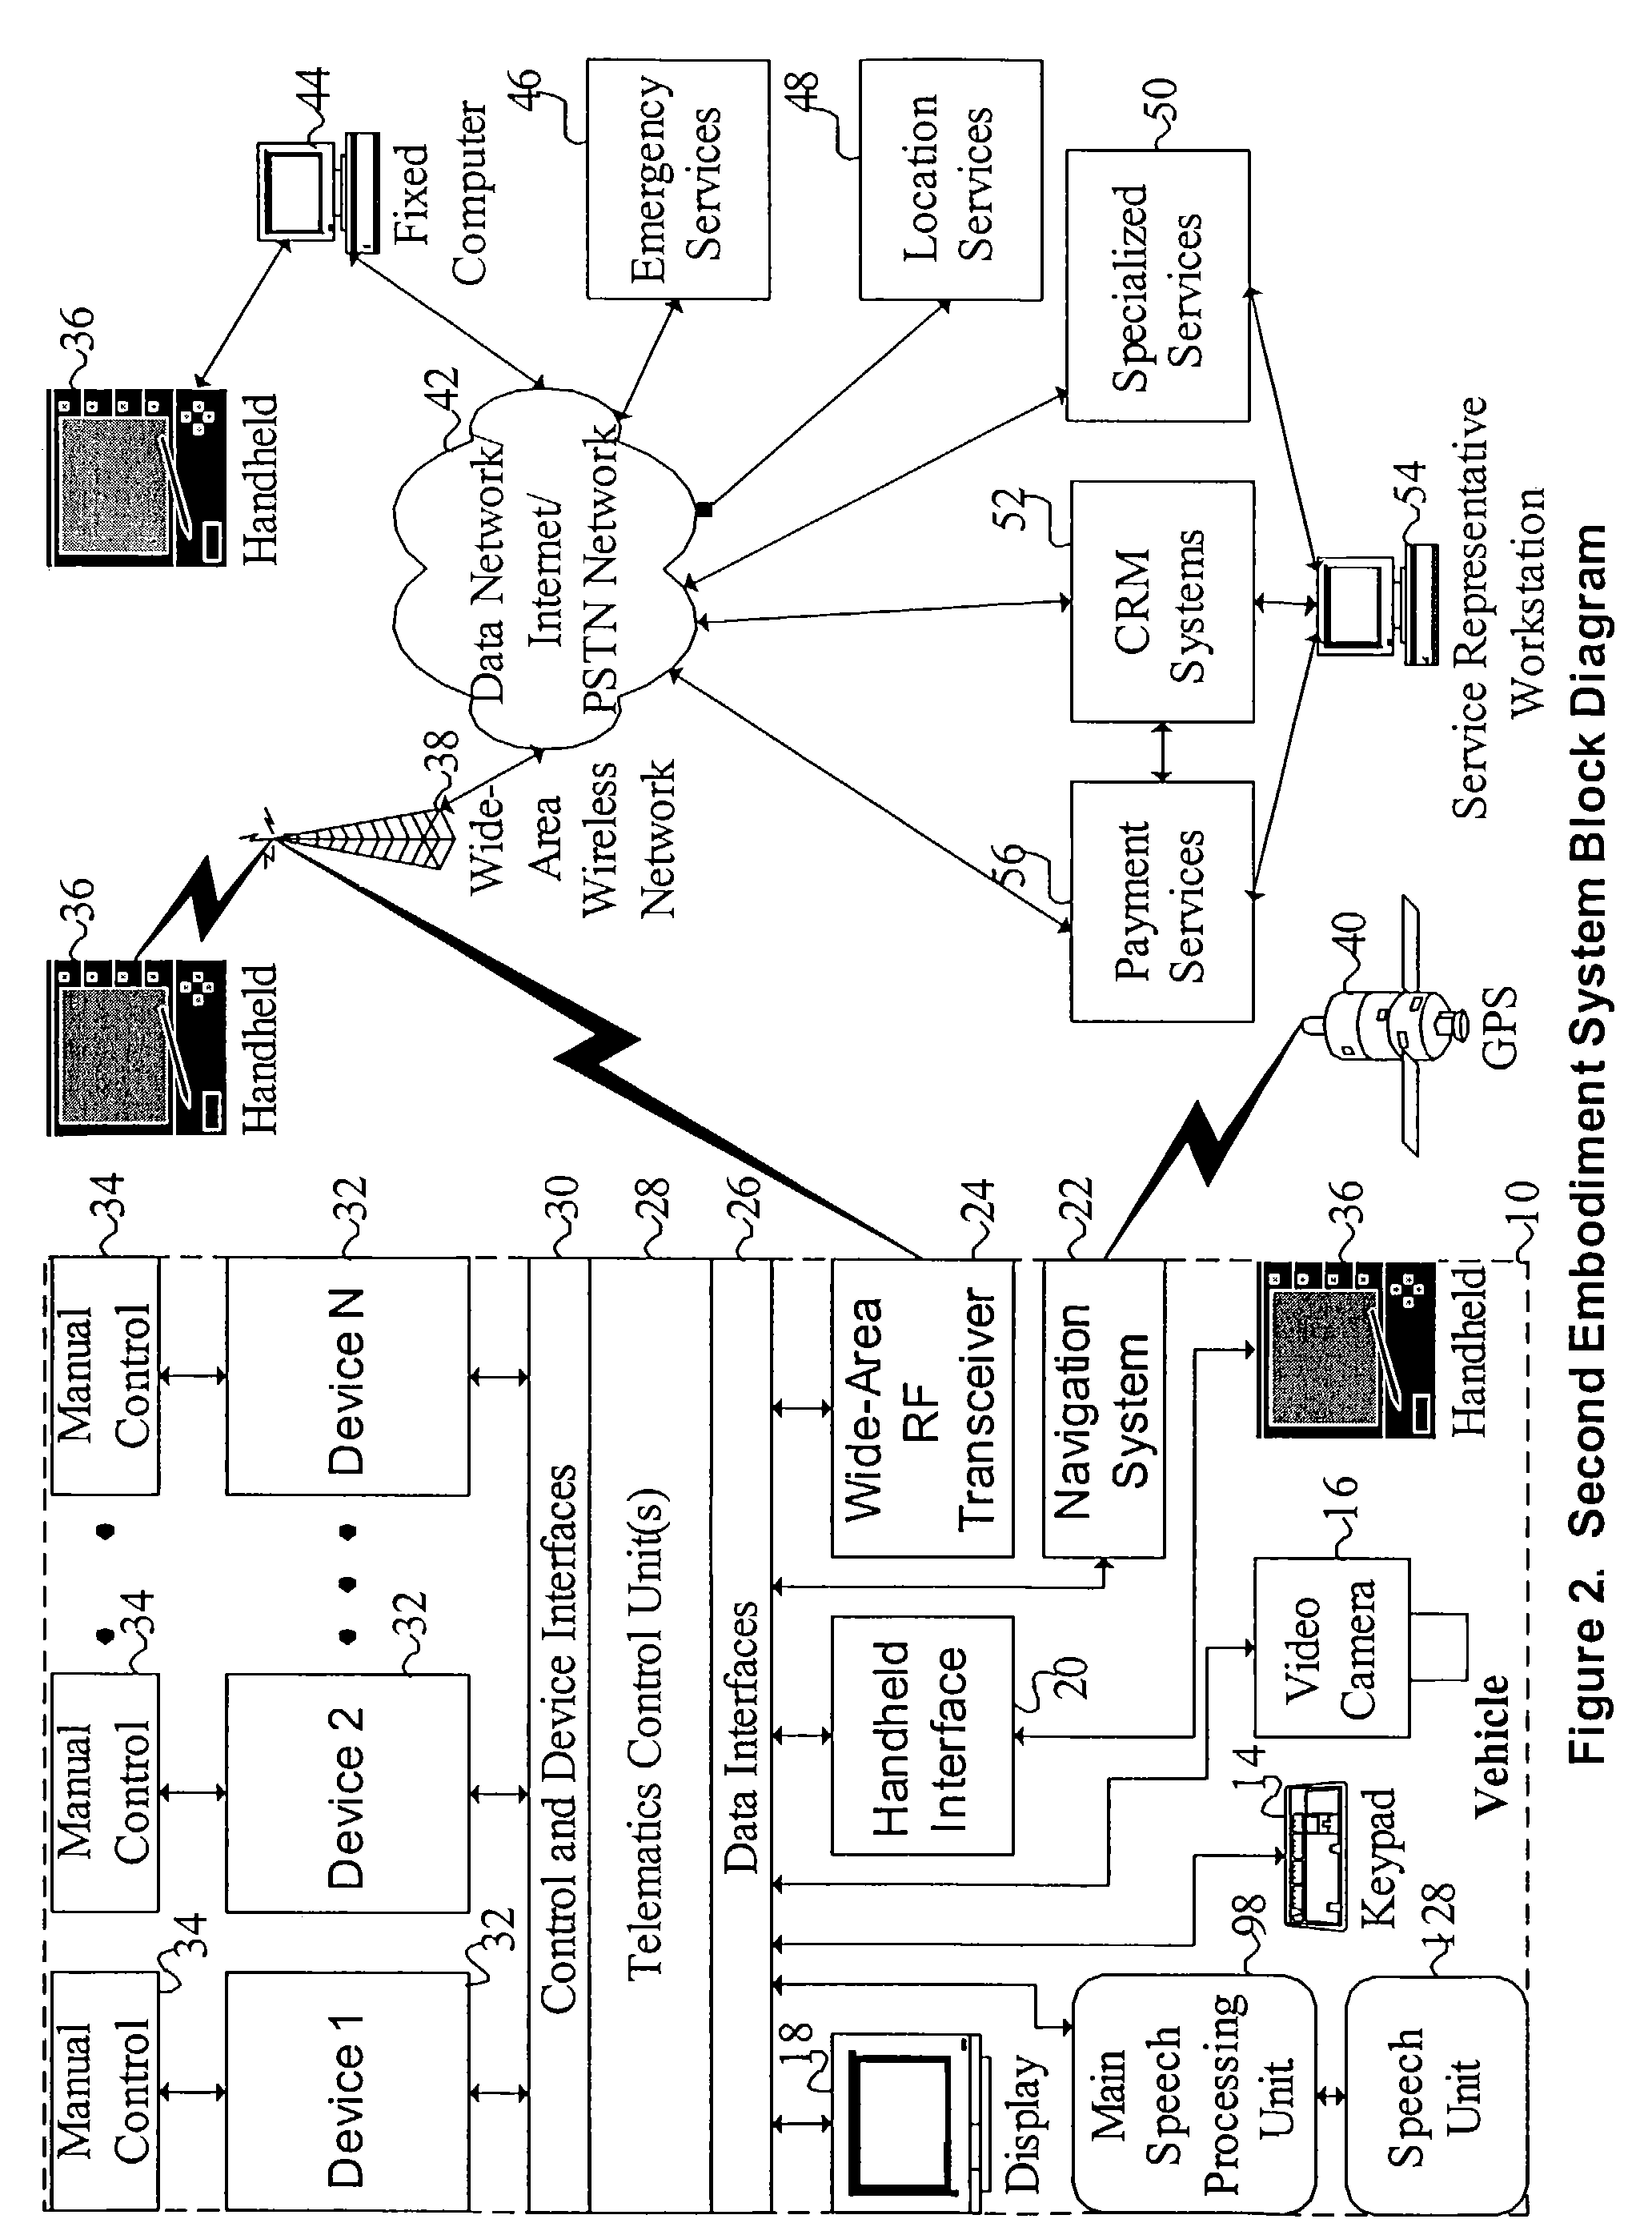 Mobile systems and methods for responding to natural language speech utterance